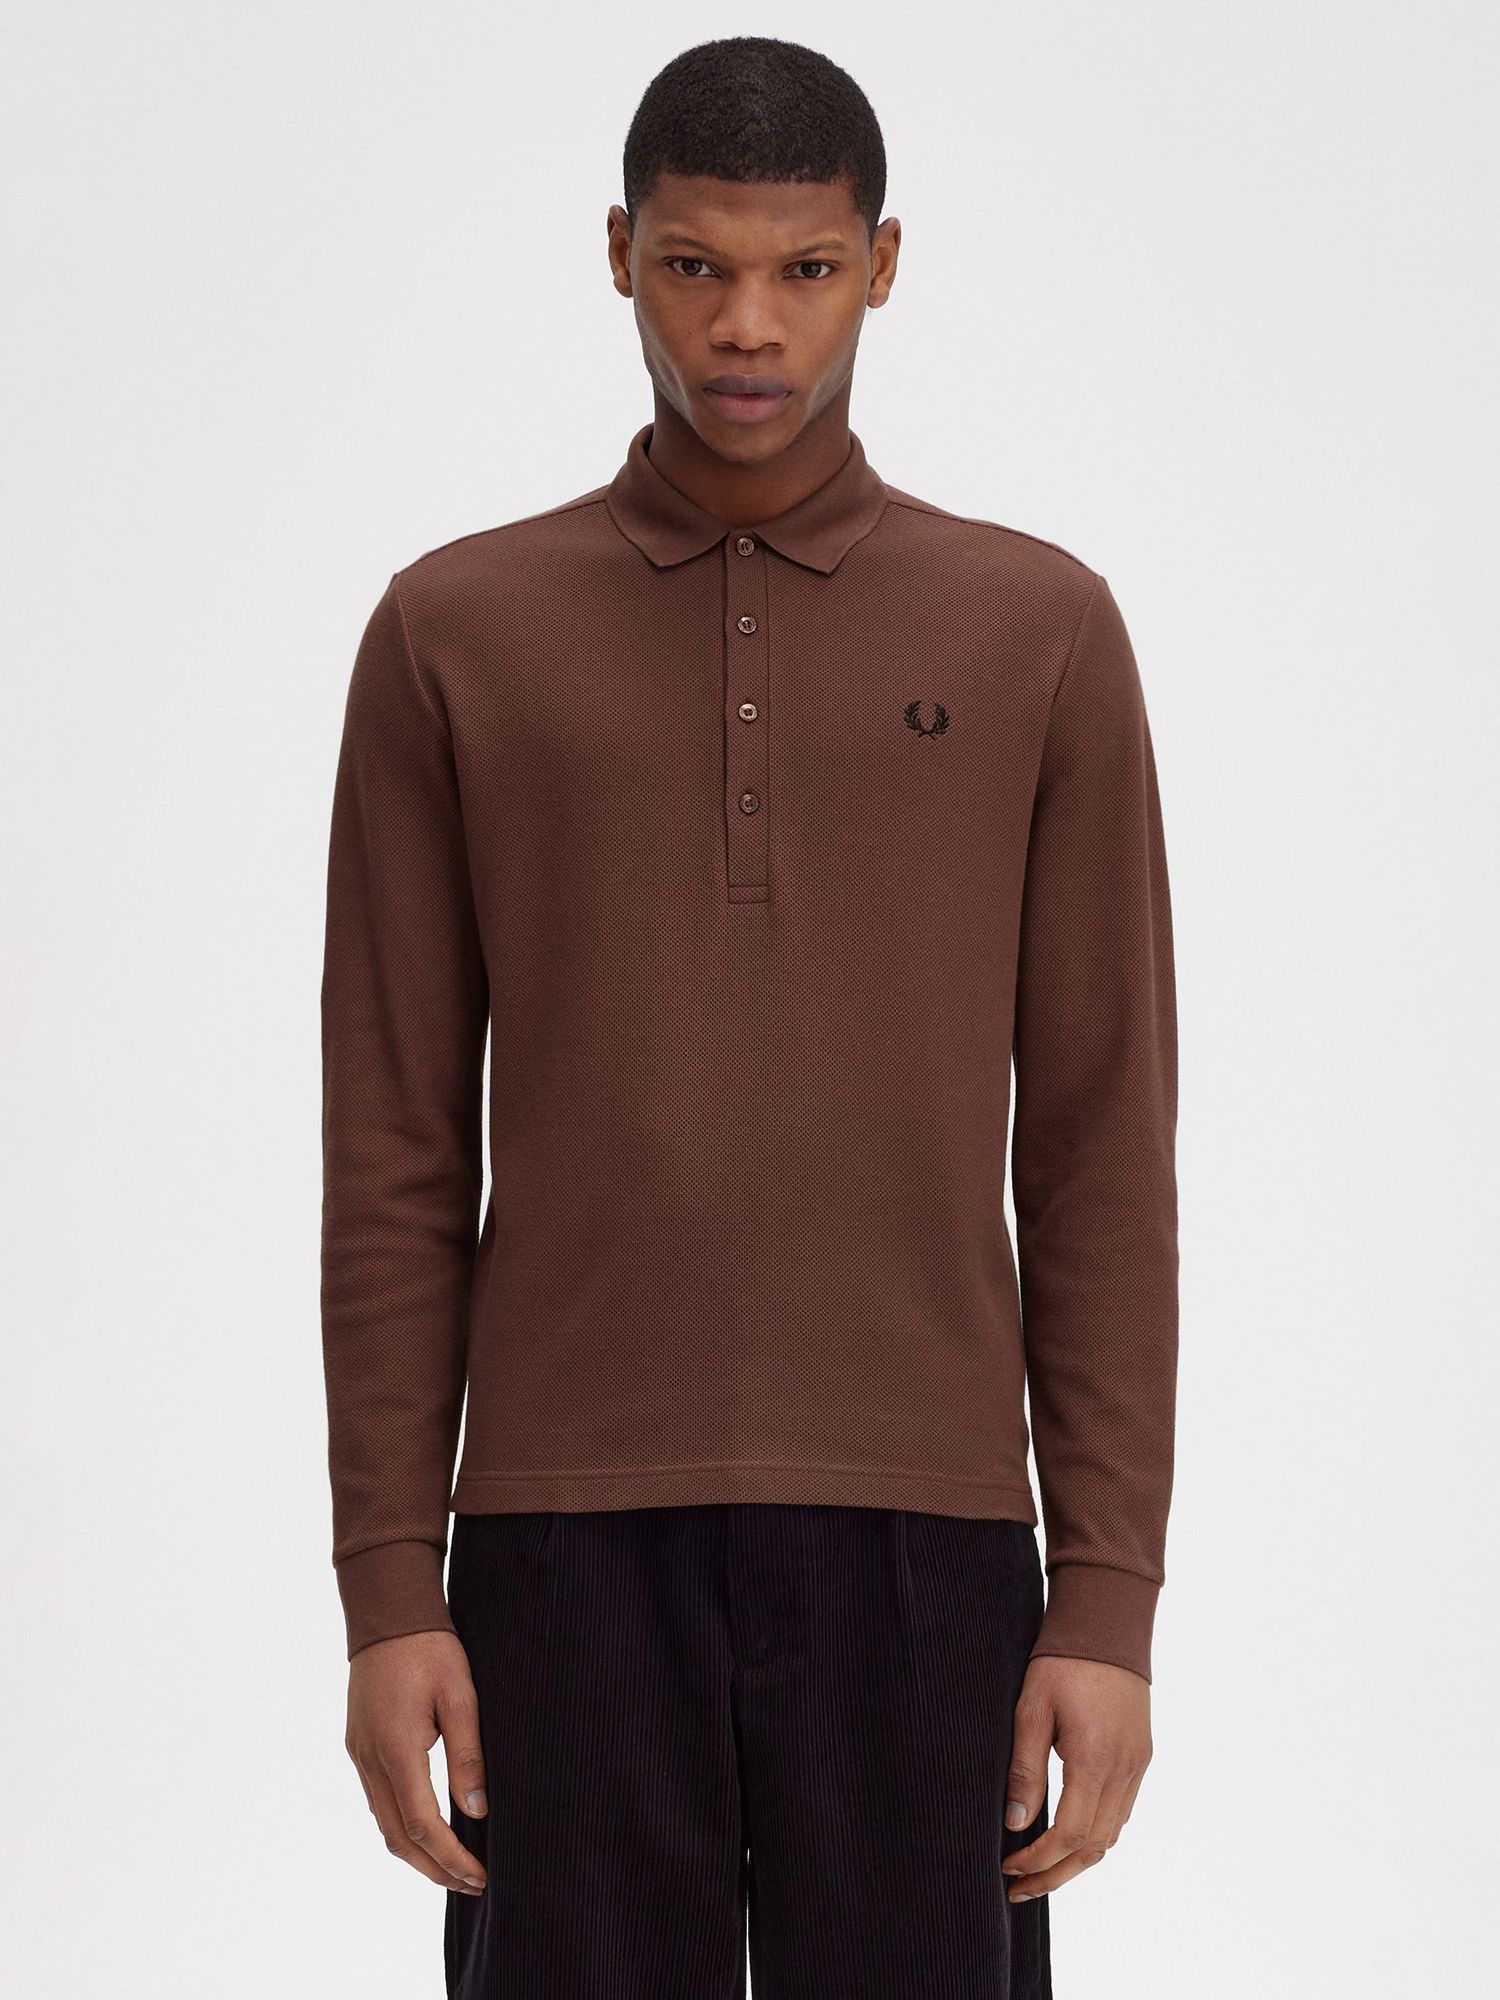 Fred Perry Long Sleeve Cotton Polo Shirt, Whiskey Brown, XL